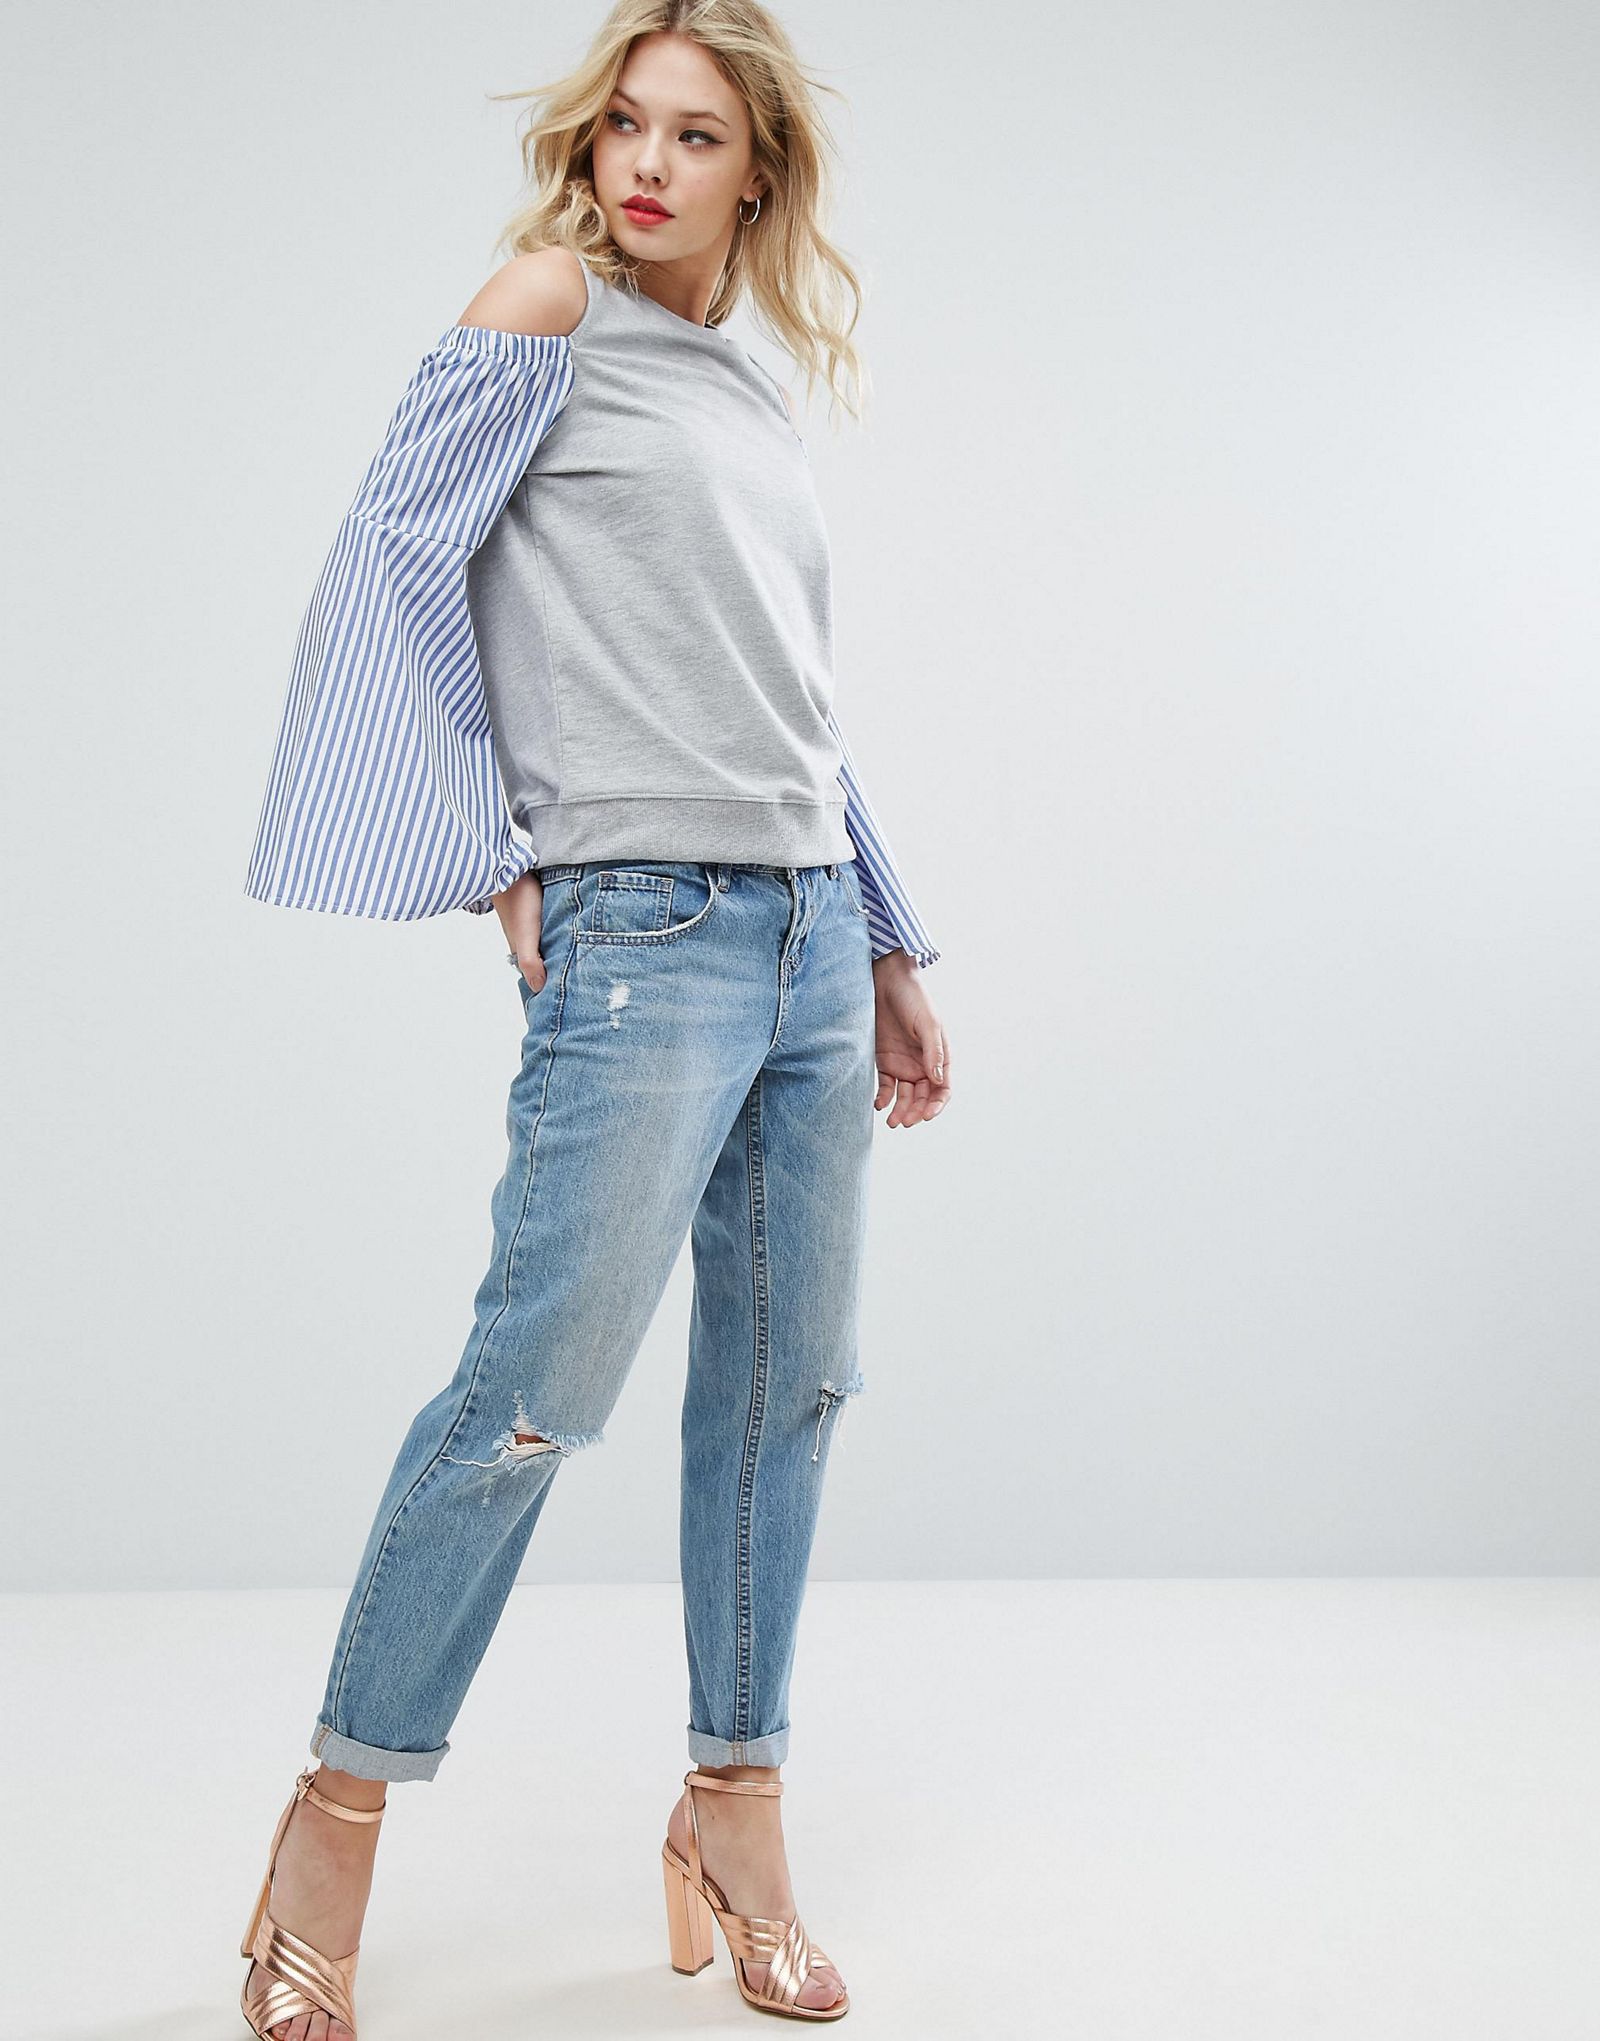 ASOS Sweatshirt with Cold Shoulder and Fluted Shirt Sleeve